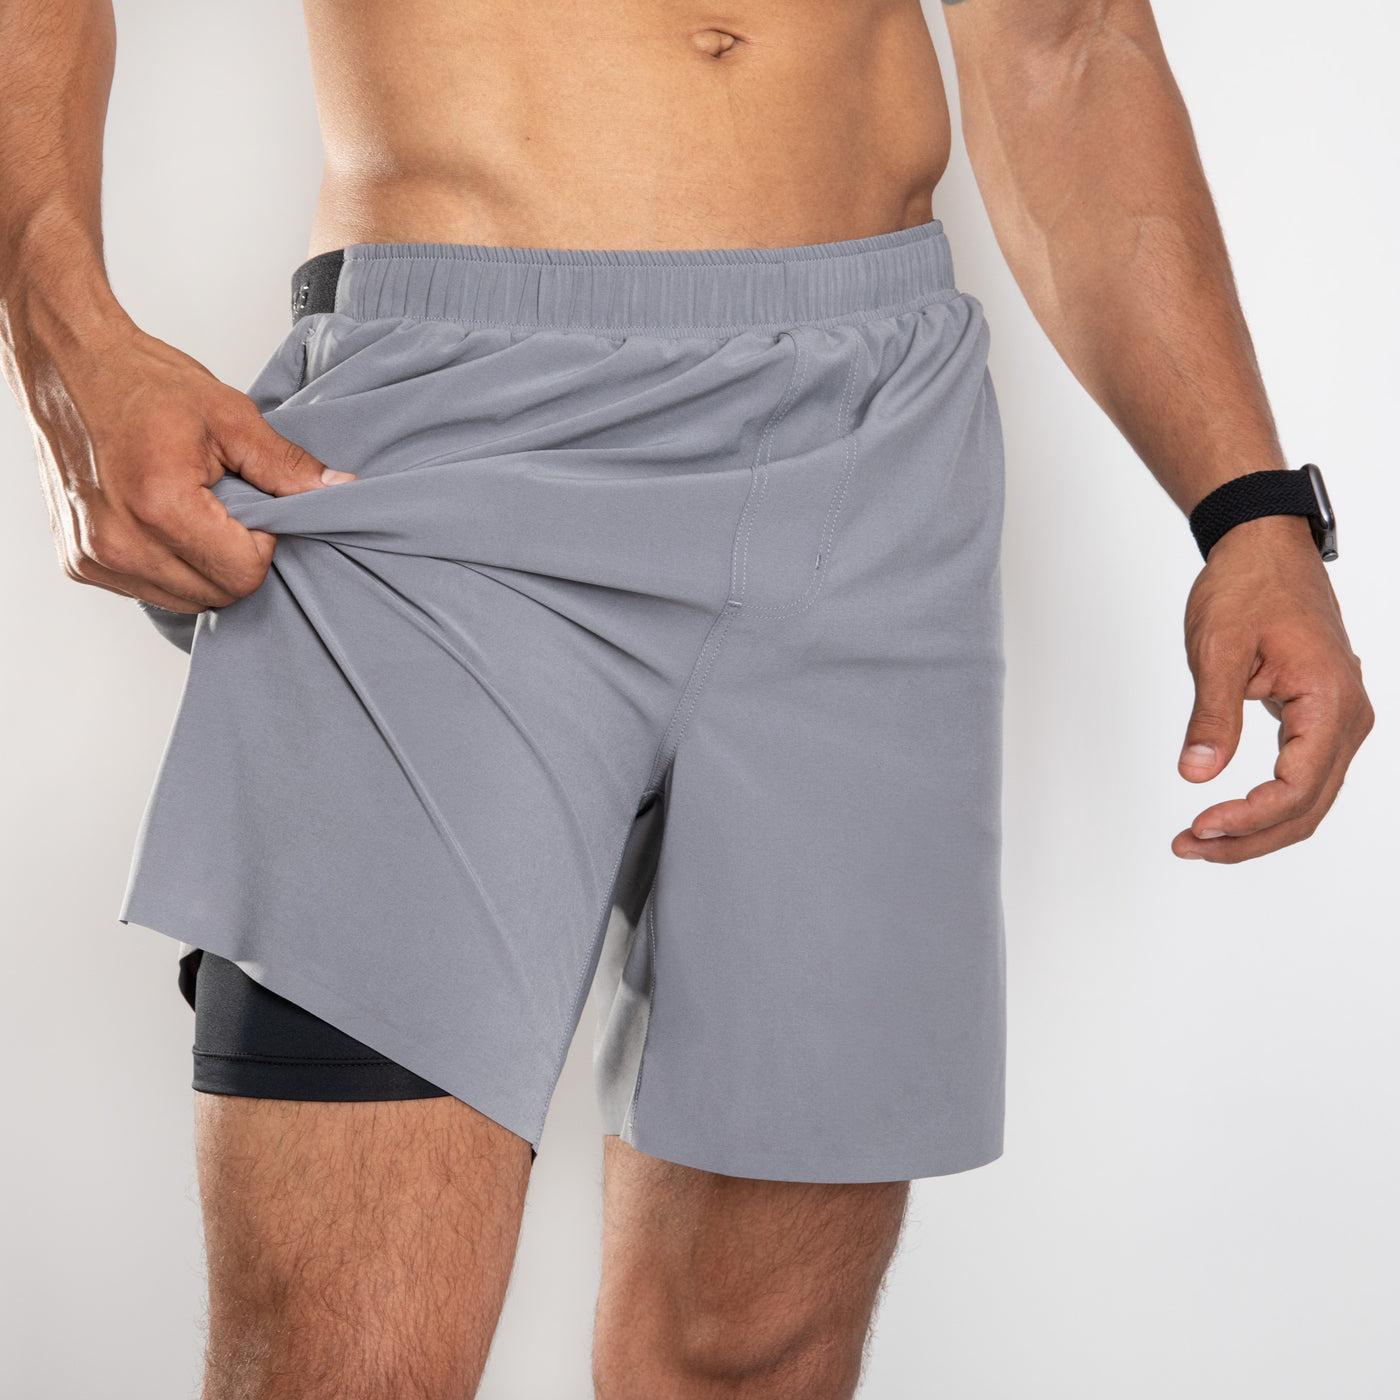 NonZero Gravity Men’s ZinTex Eco Running Shorts with Lining made with Recycled Polyester & Spandex in Concrete